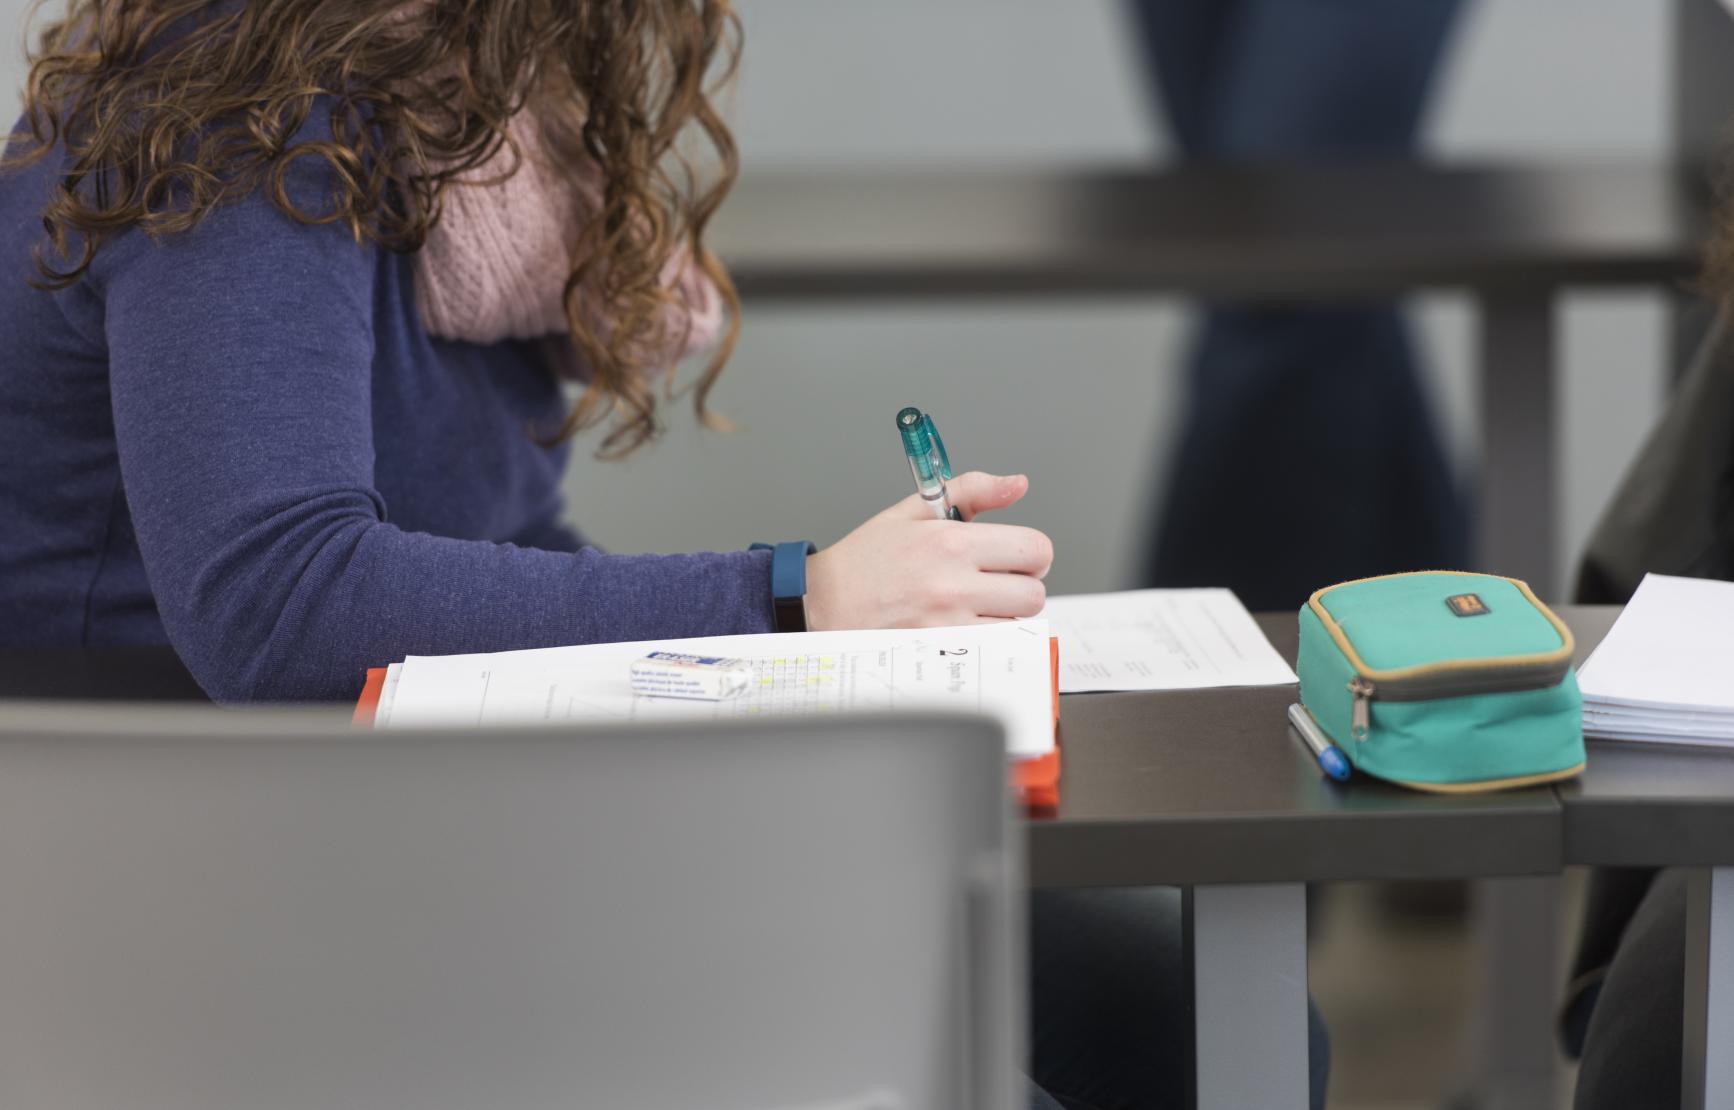 A cropped image of someone holding a pencil in their hand while sitting at a desk working on homework.